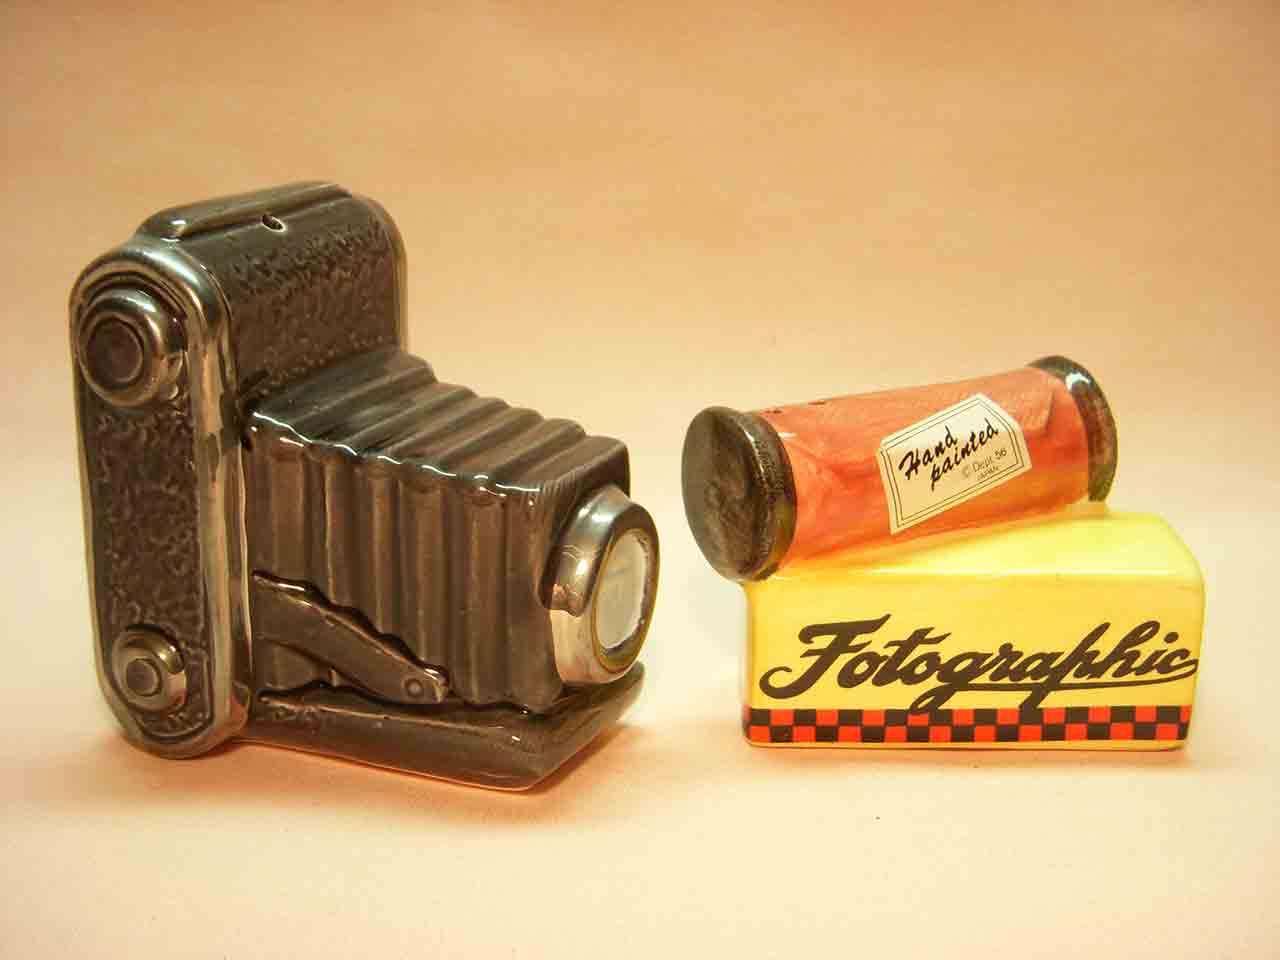 Camera and film salt and pepper shakers